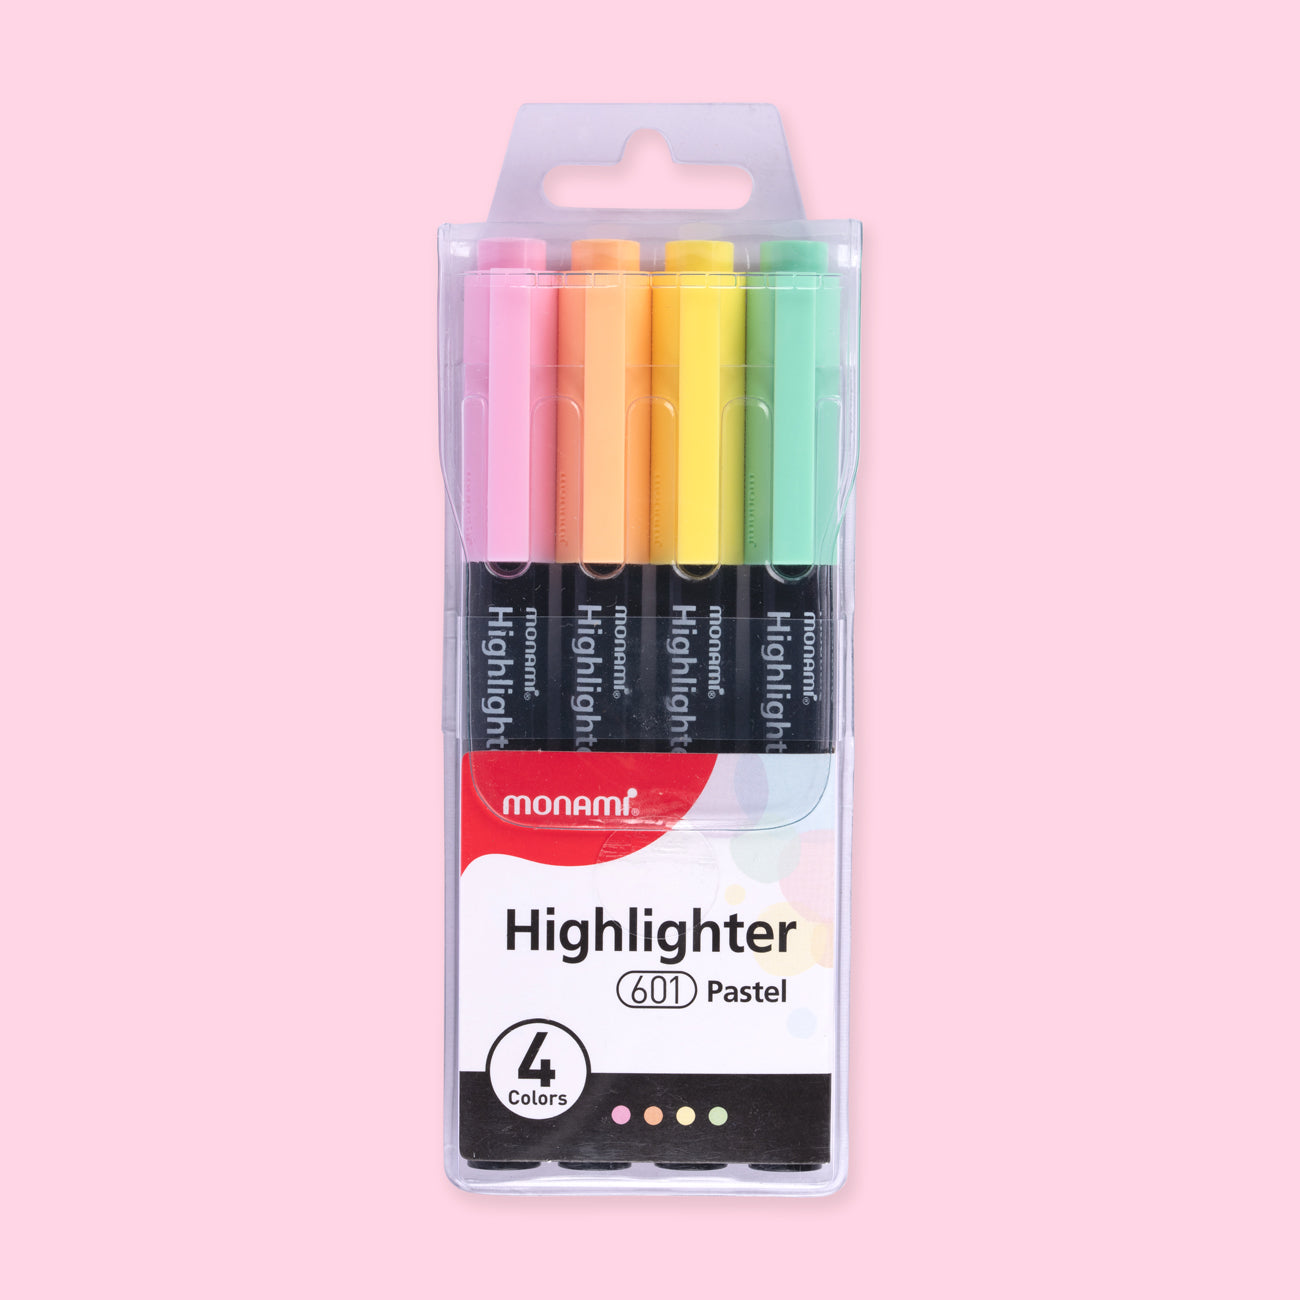 6pcs Colored Single-head Soft-tip Highlighter Pen, Stationery, Art